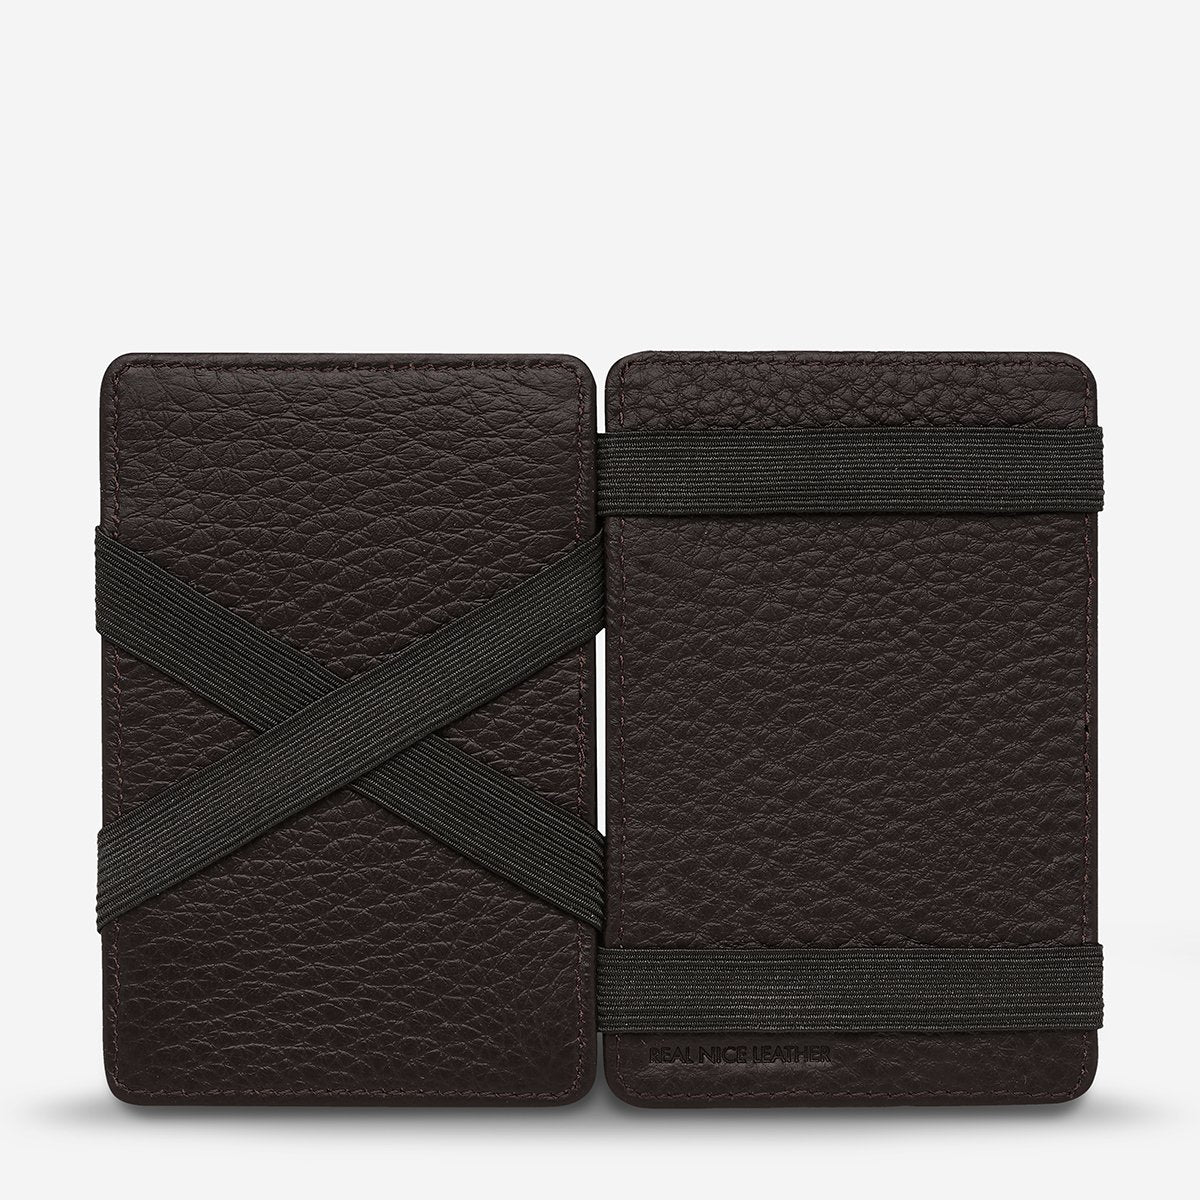 Flip Leather Wallet in Chocolate